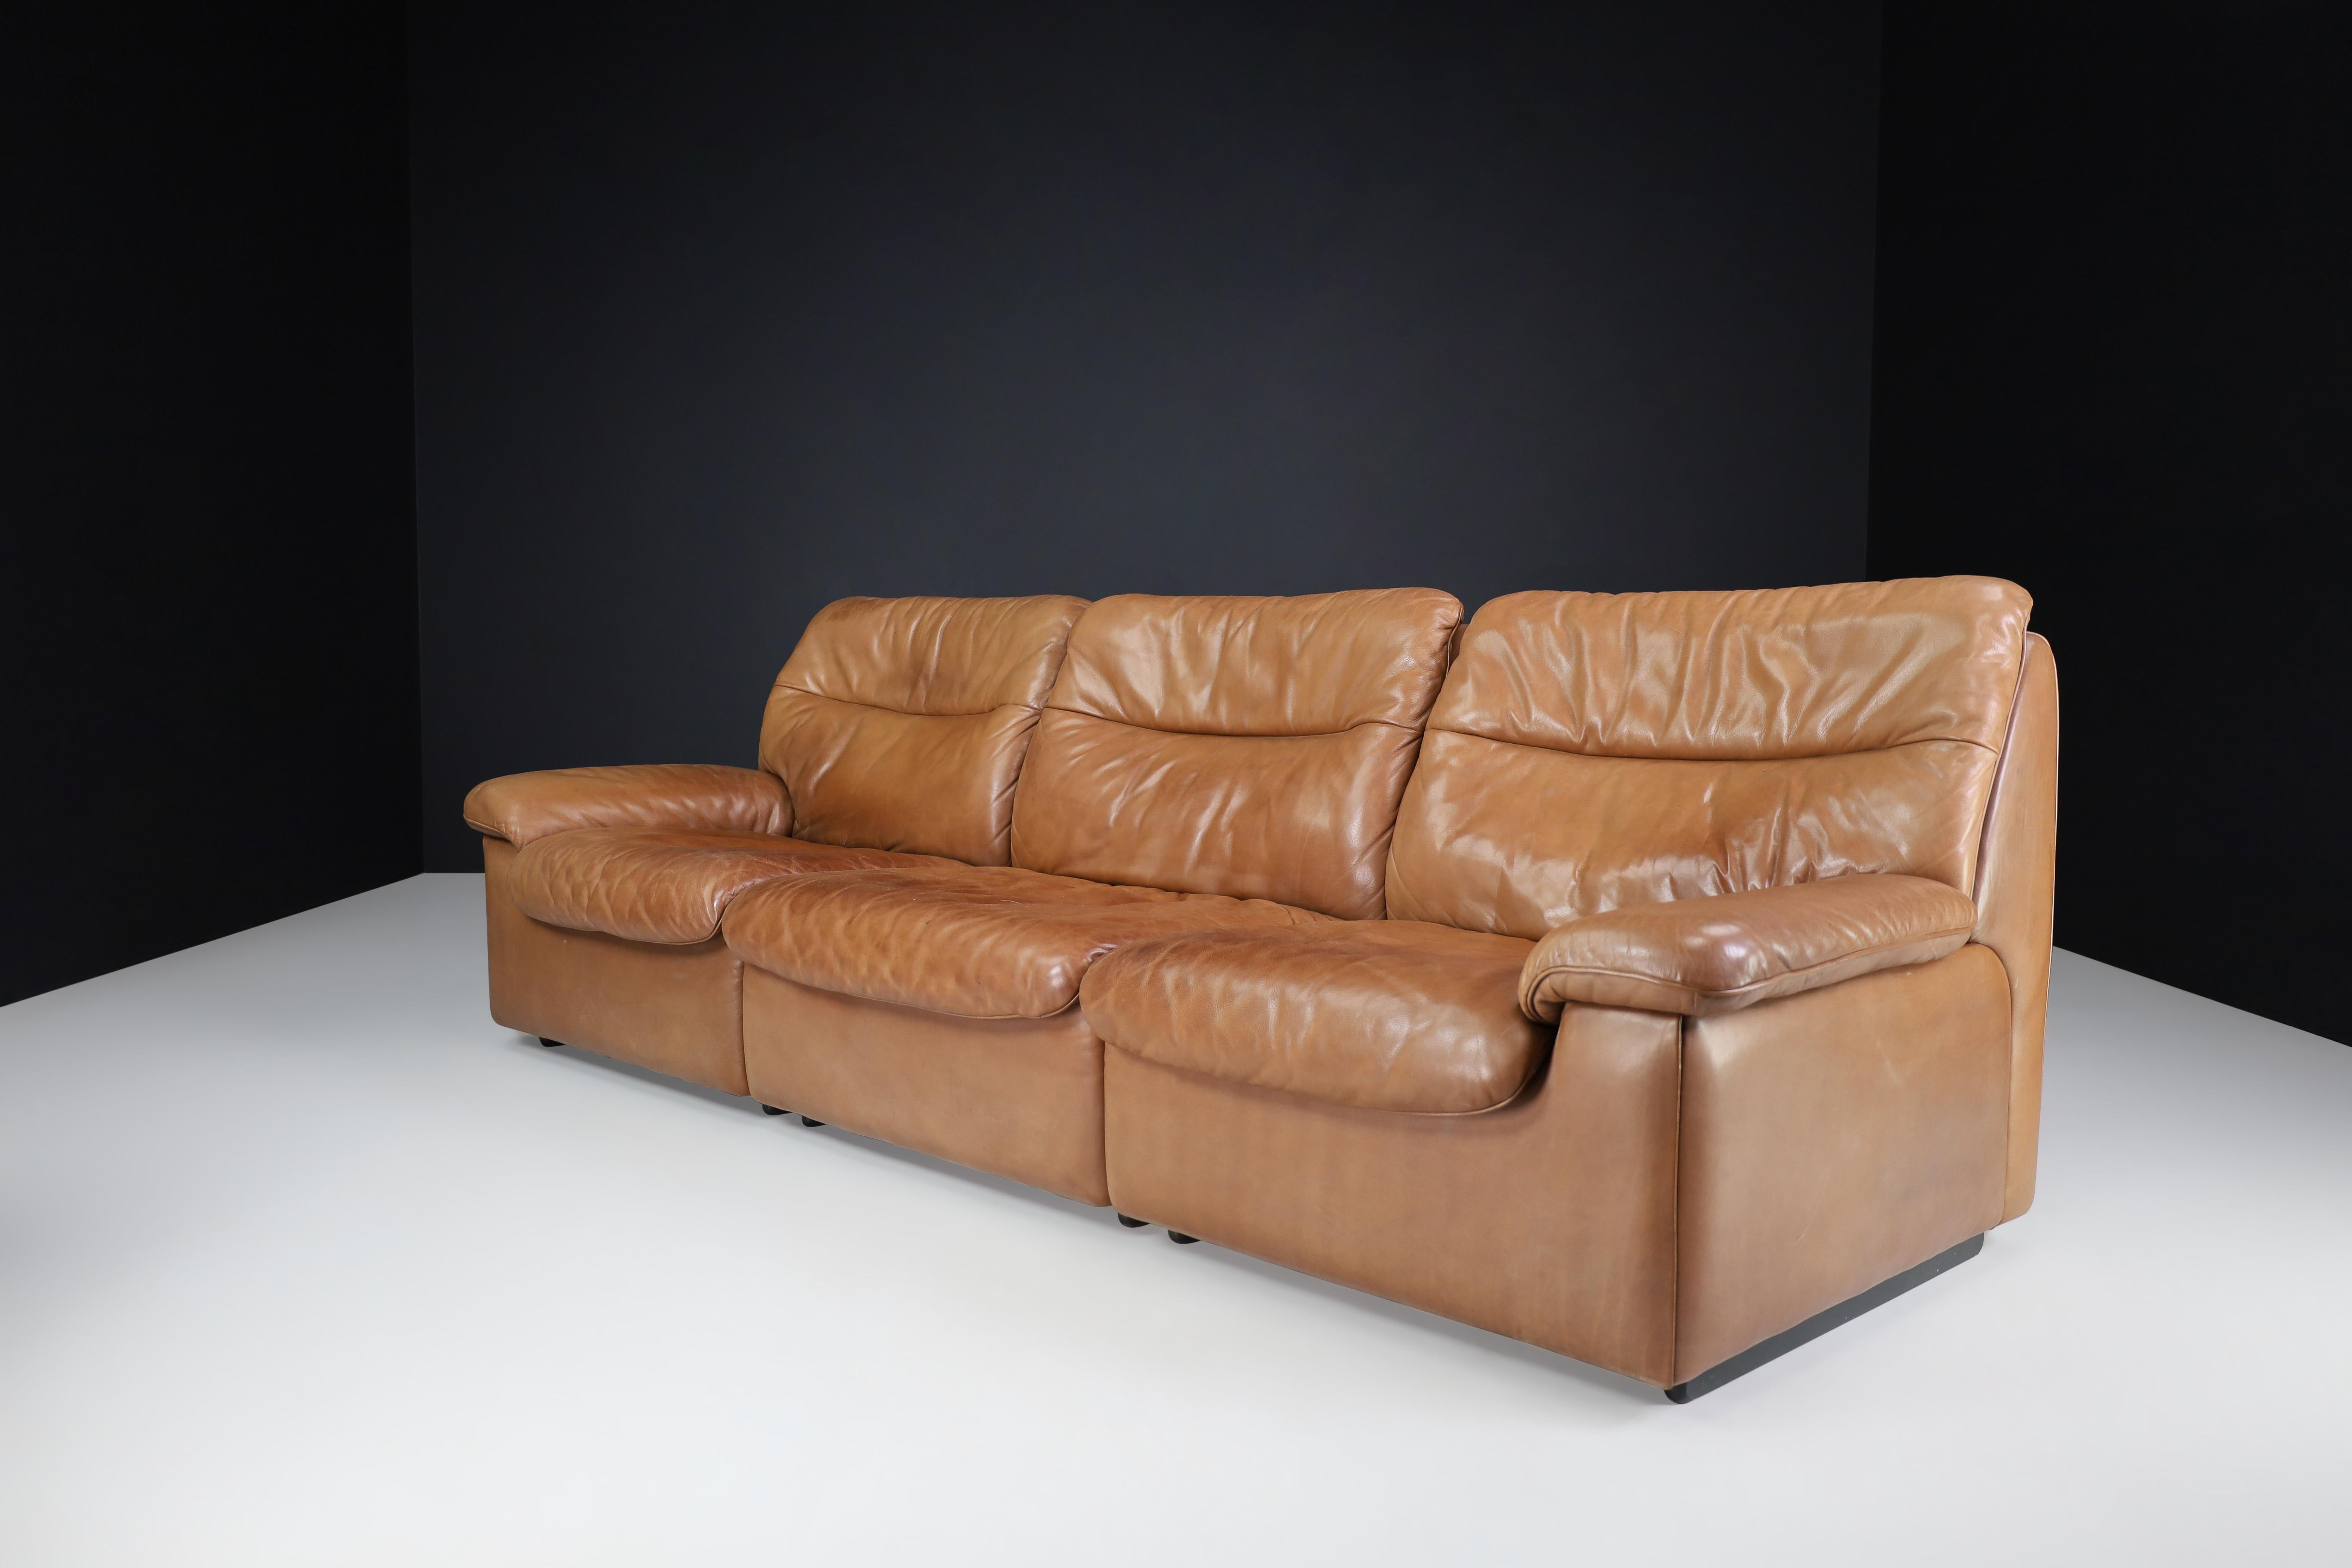 De Sede DS 63 three-seater sofa in patinated leather, Switzerland, 1970s.

Robust DS-63 modular three-seater sofa. This De Sede sofa ensures ultimate comfort and building quality with its solid wooden frame and thick handstitched leather